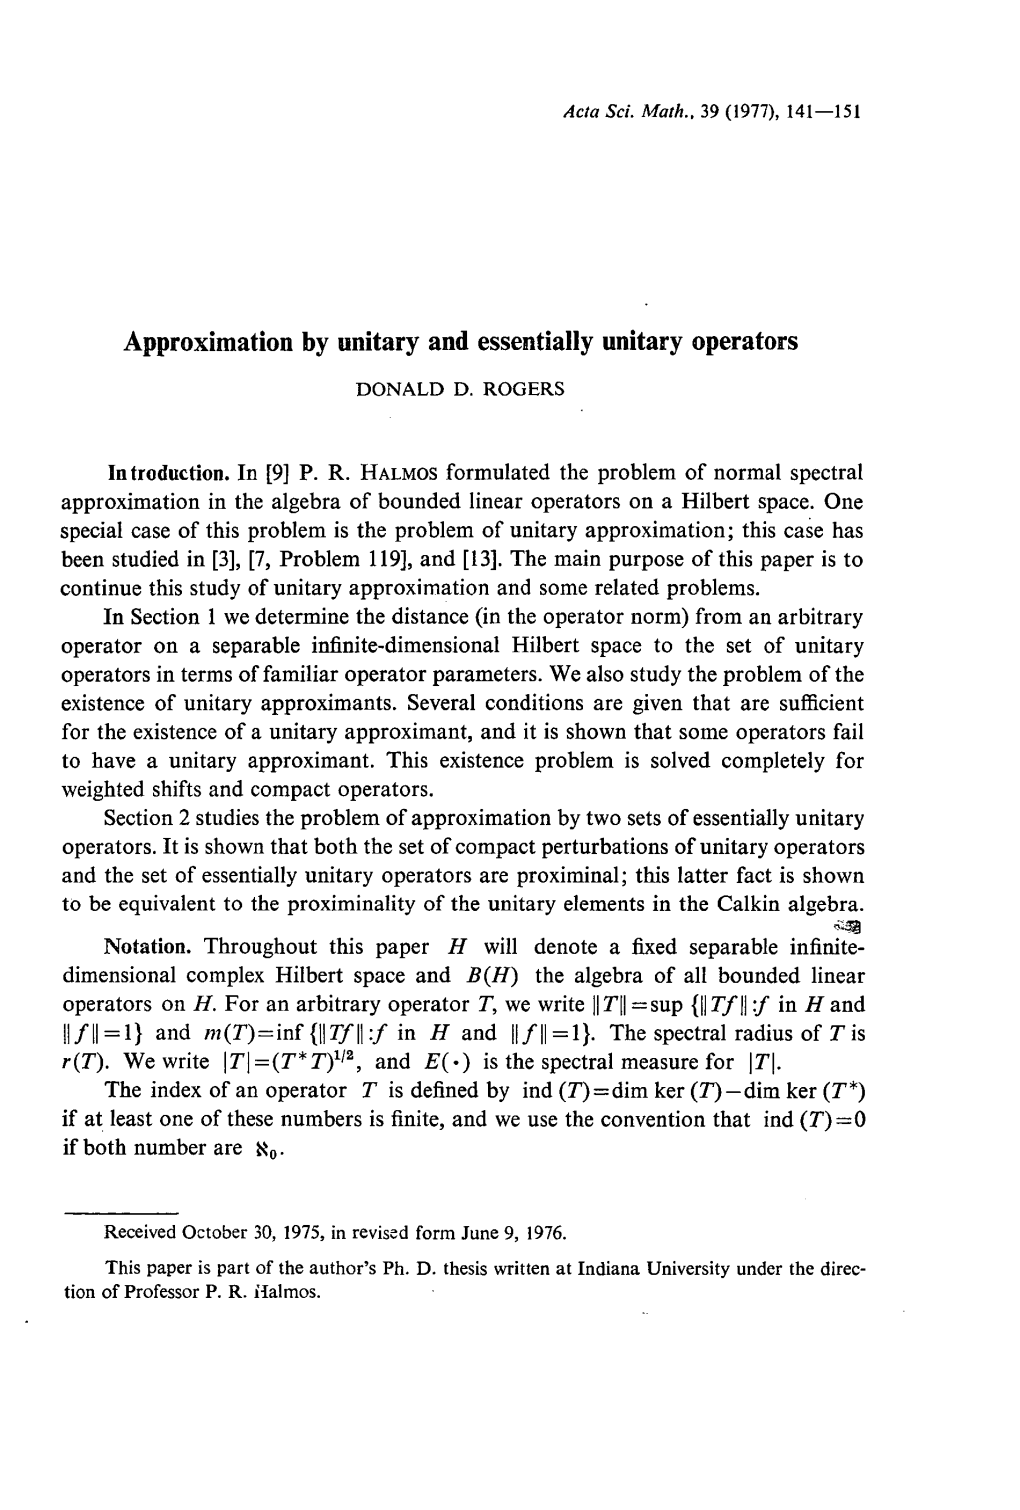 Approximation by Unitary and Essentially Unitary Operators